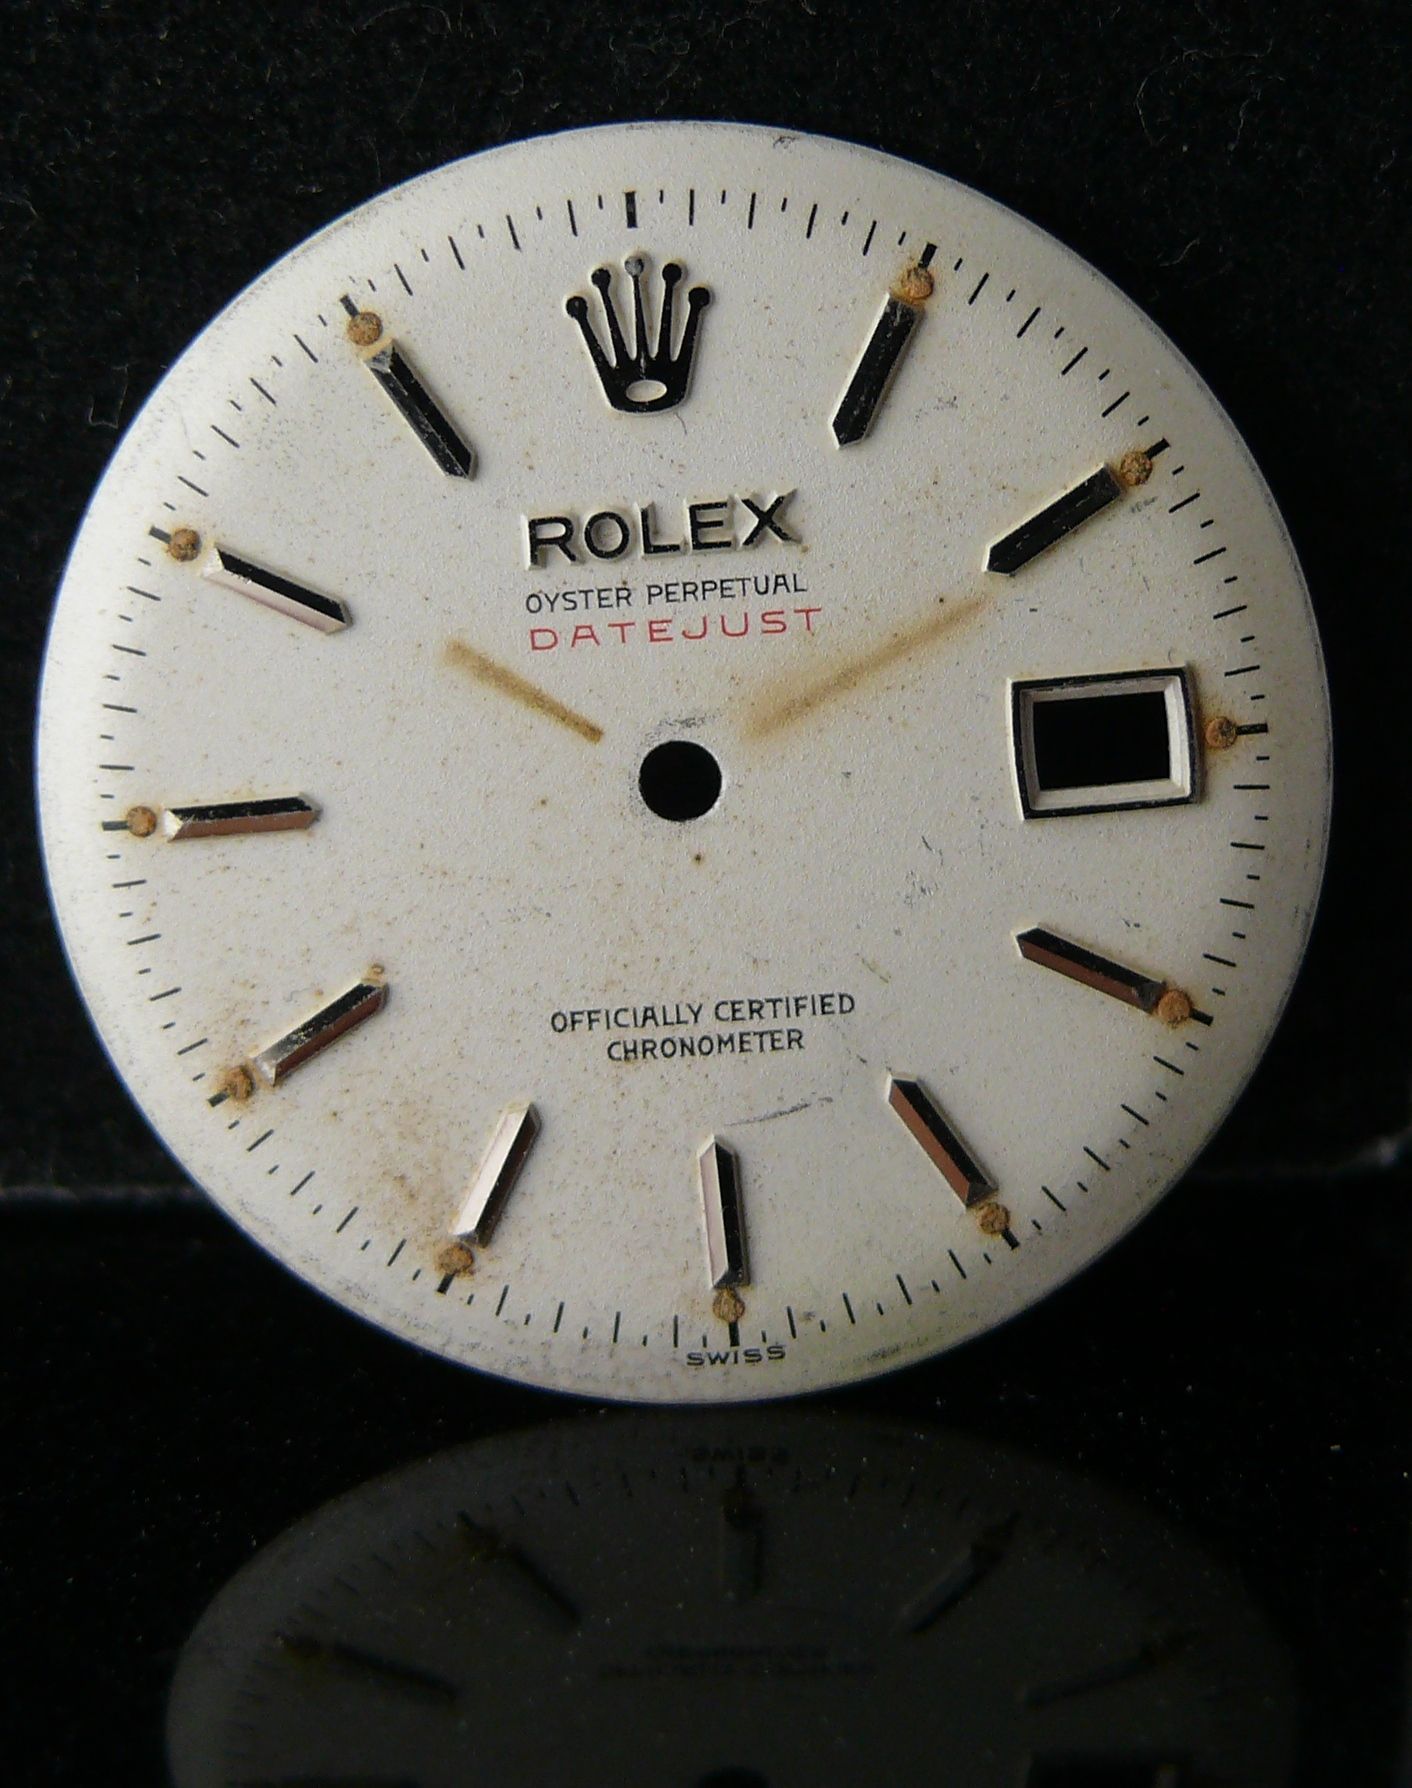 1950s Vintage Rolex Datejust Ovettone Bubbleback 6305 Dial. Please note the dial is completely - Image 4 of 5